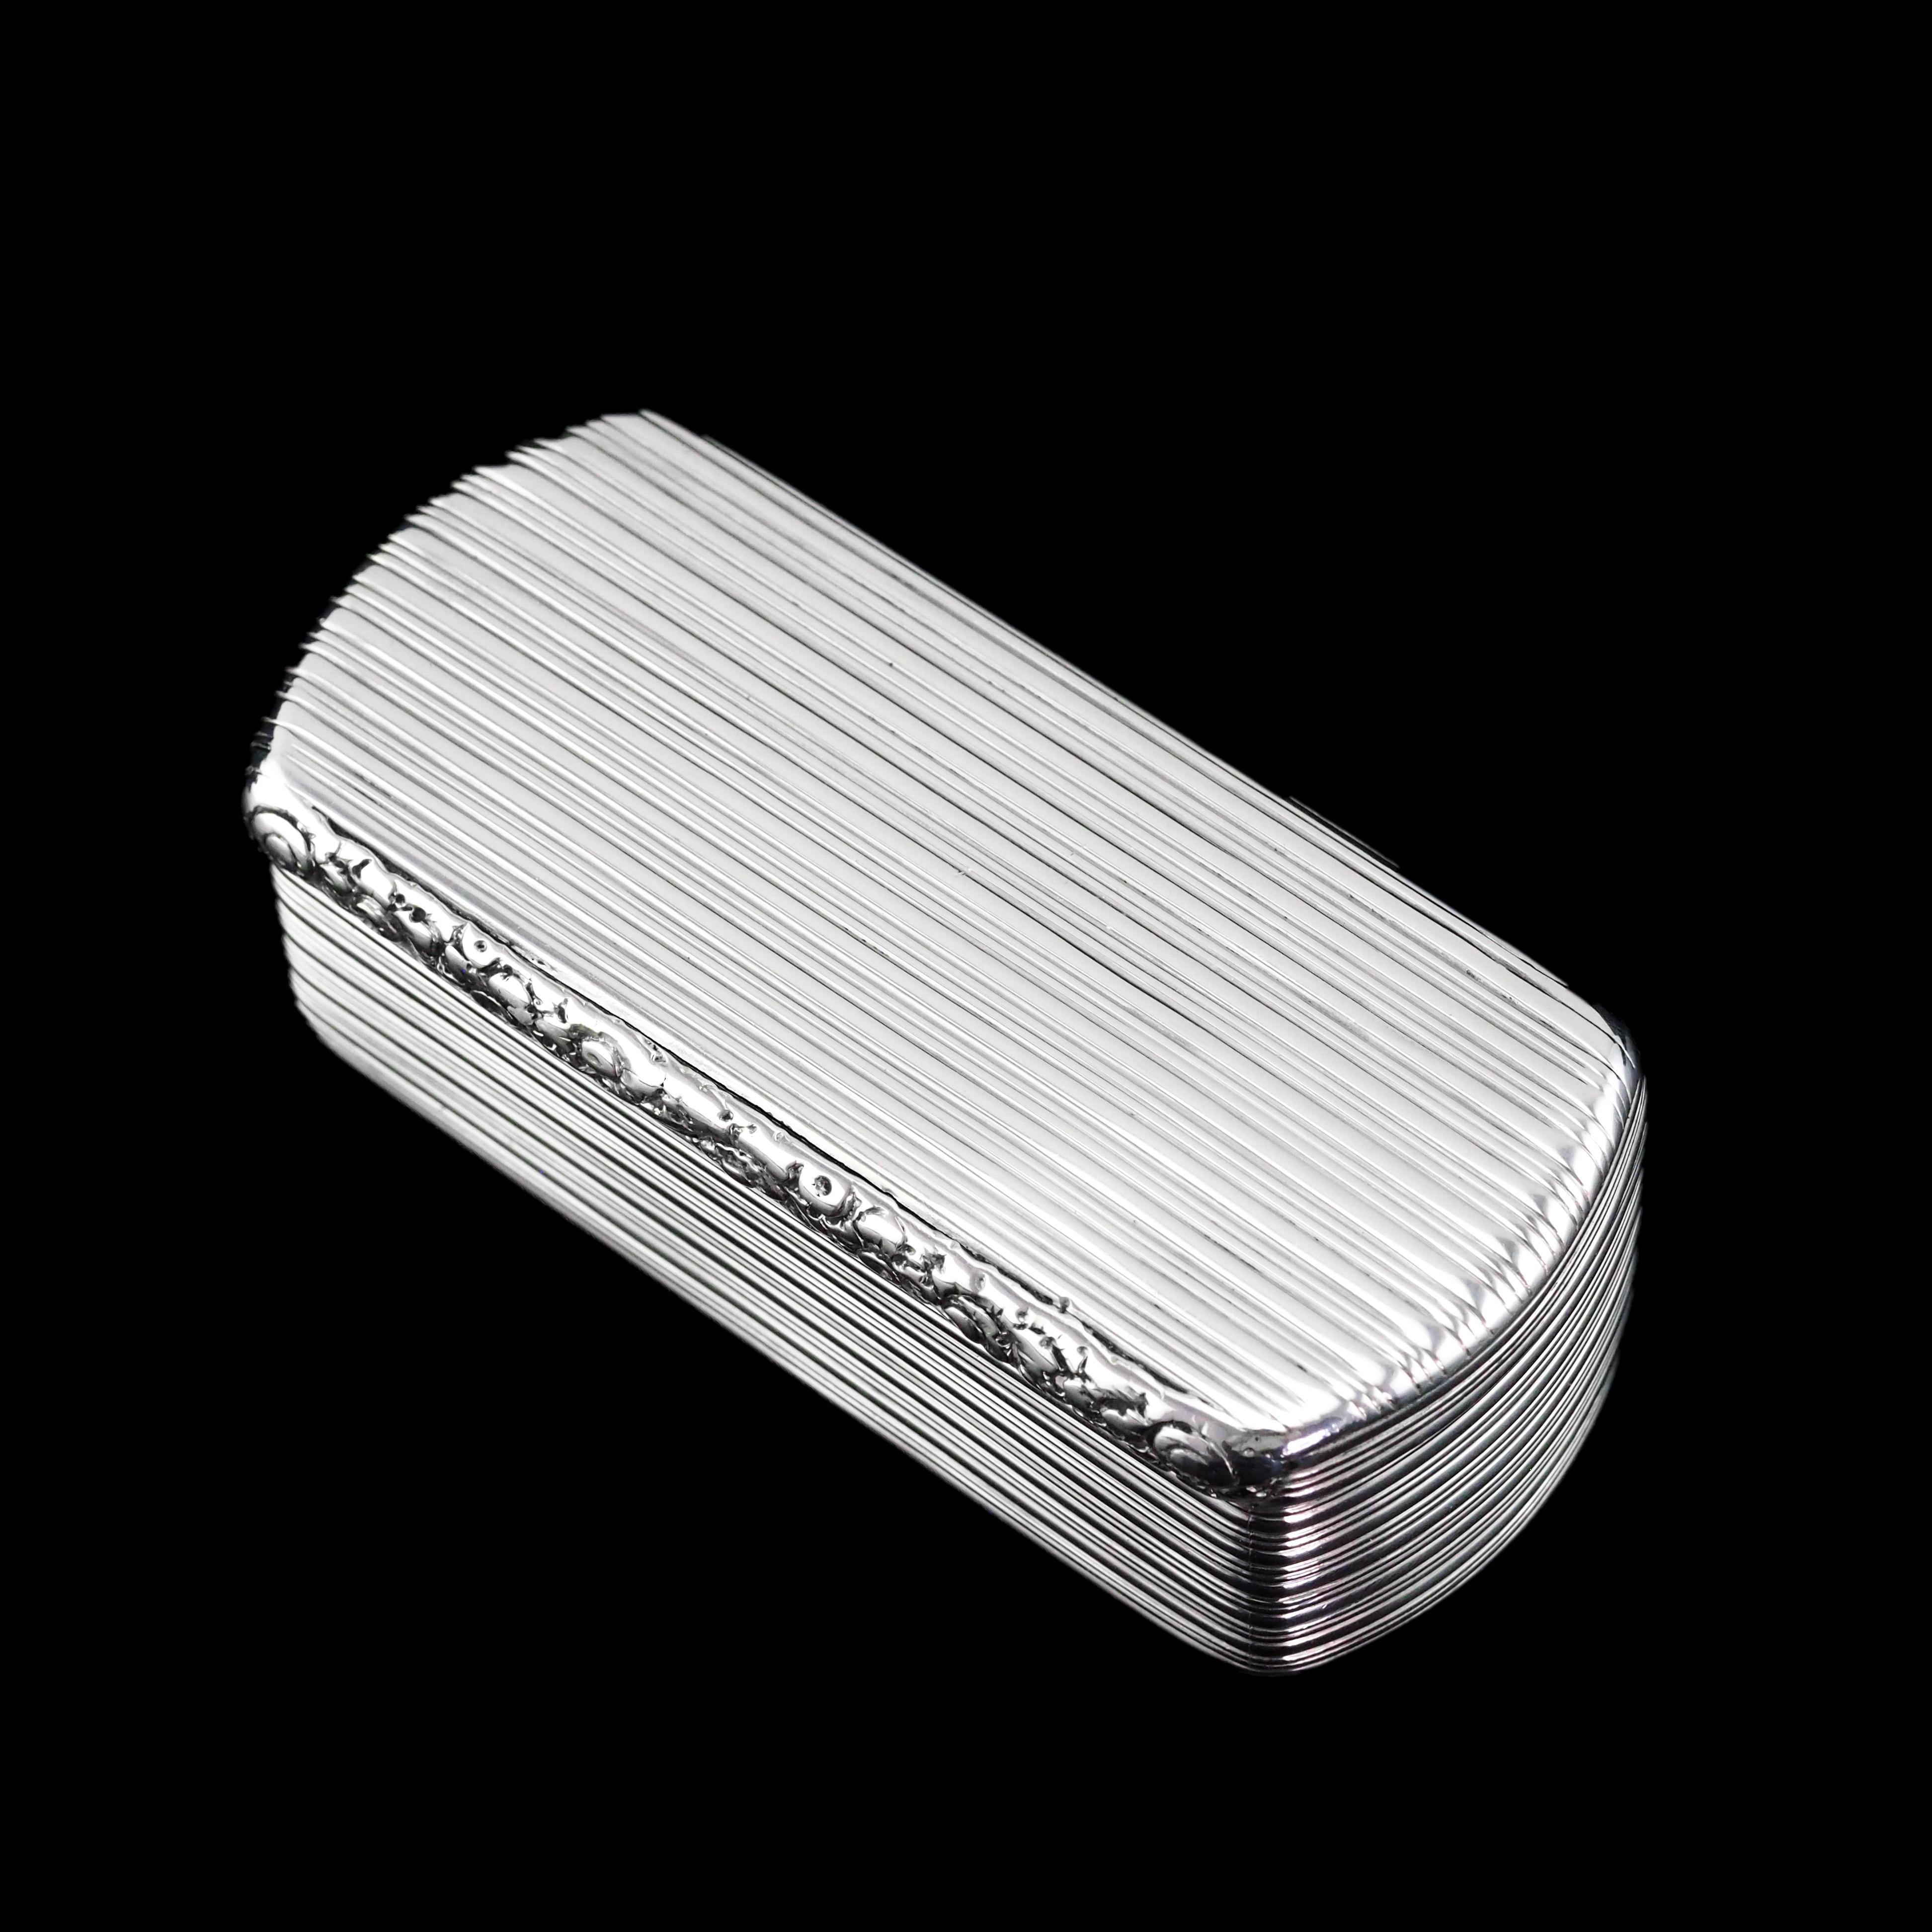 Antique Georgian Solid Silver Snuff Box Oblong Shape with Reeded Lines - Charles For Sale 1